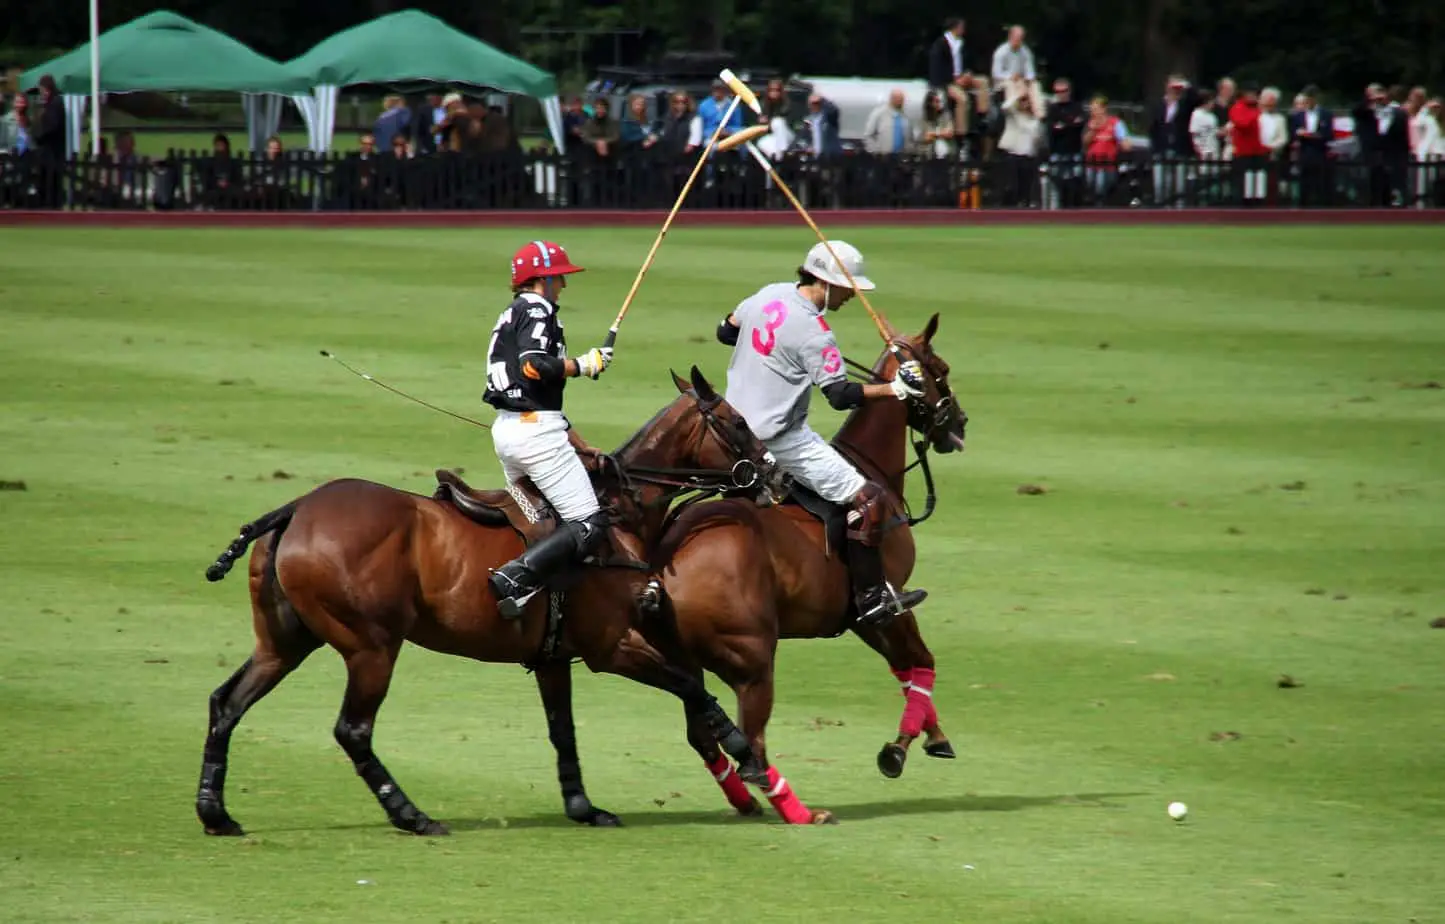 Why Is Polo No Longer An Olympic Sport? The Future of Polo